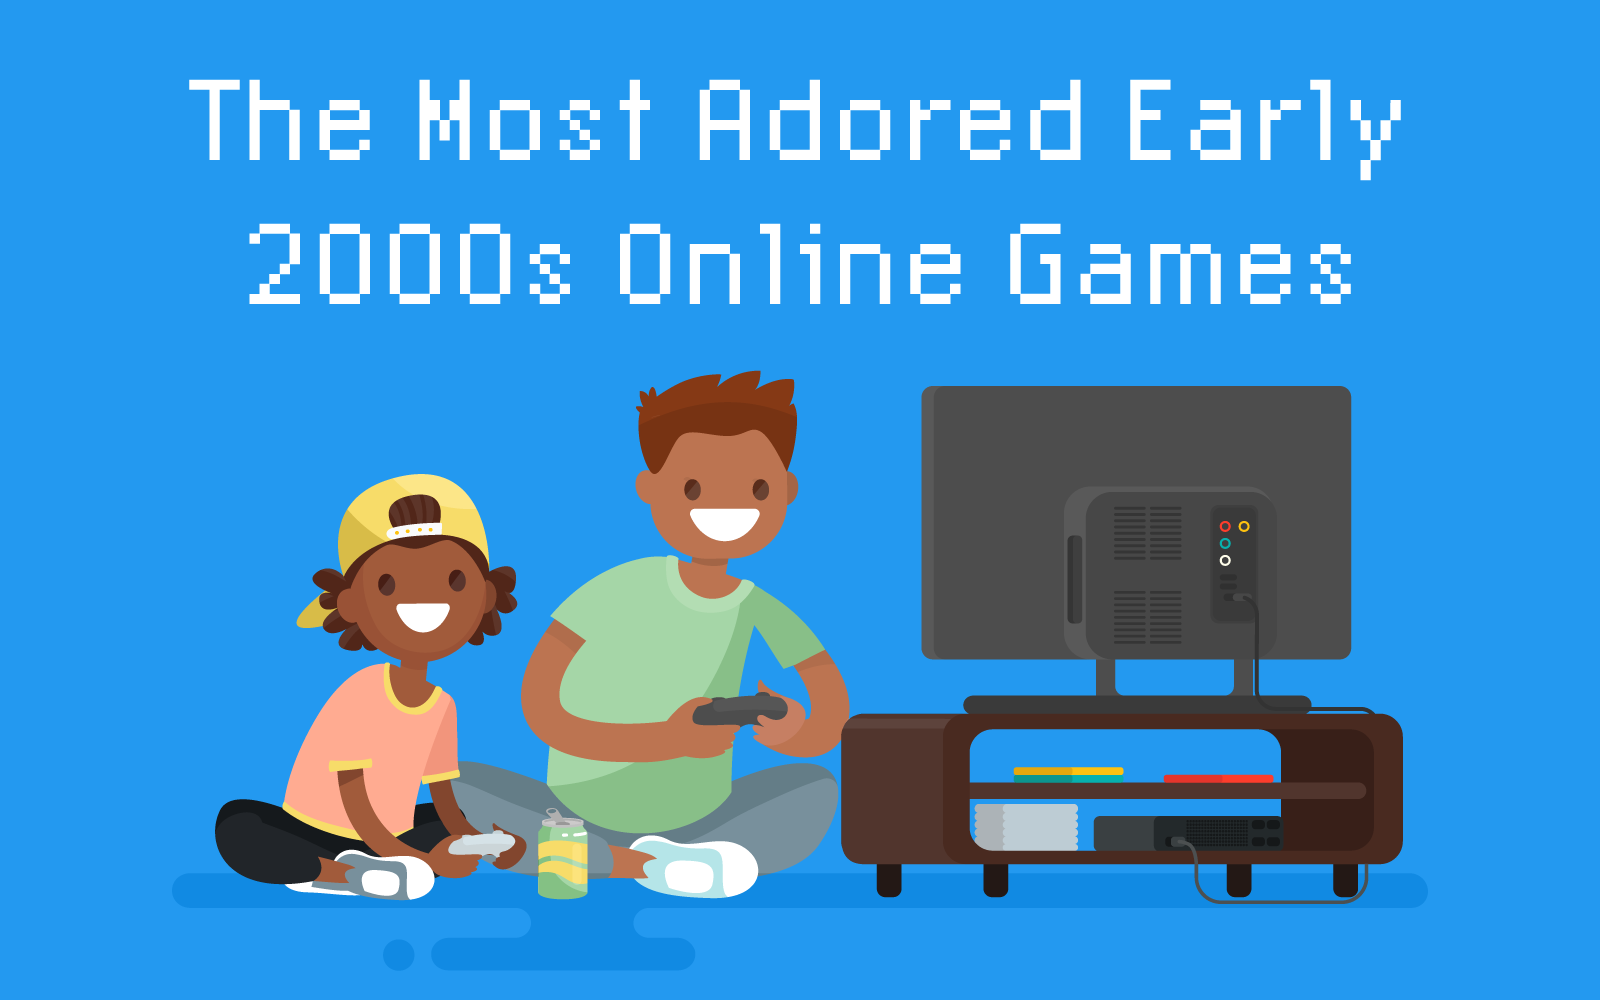 Reasons to play online gaming